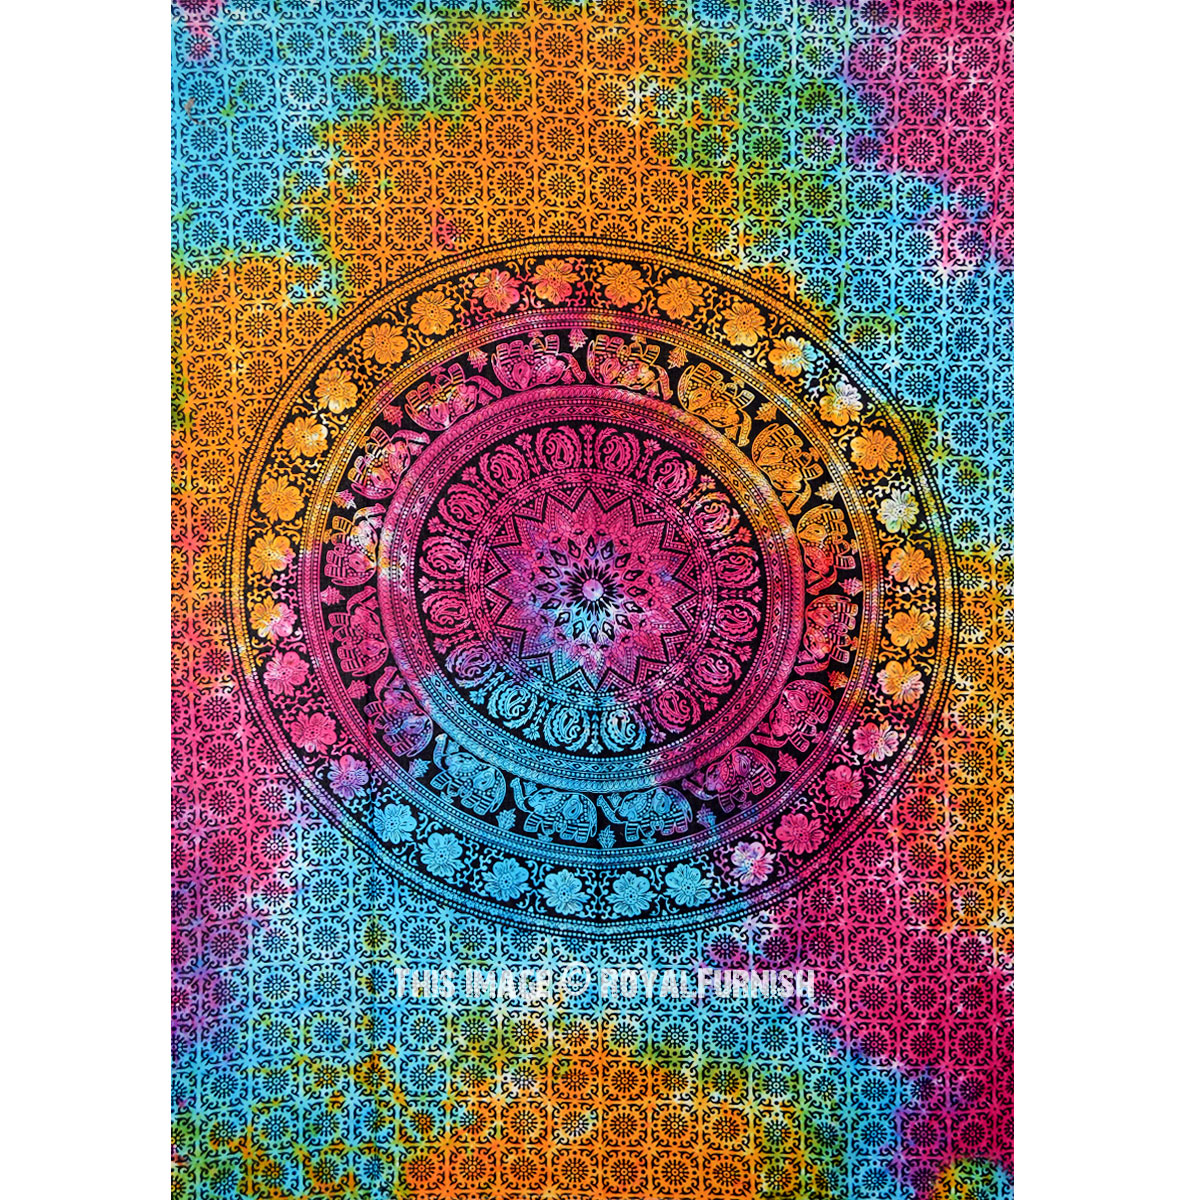 Floral and Elephant Star Circle Tie Dye Tapestry, Mandala Wall Hanging